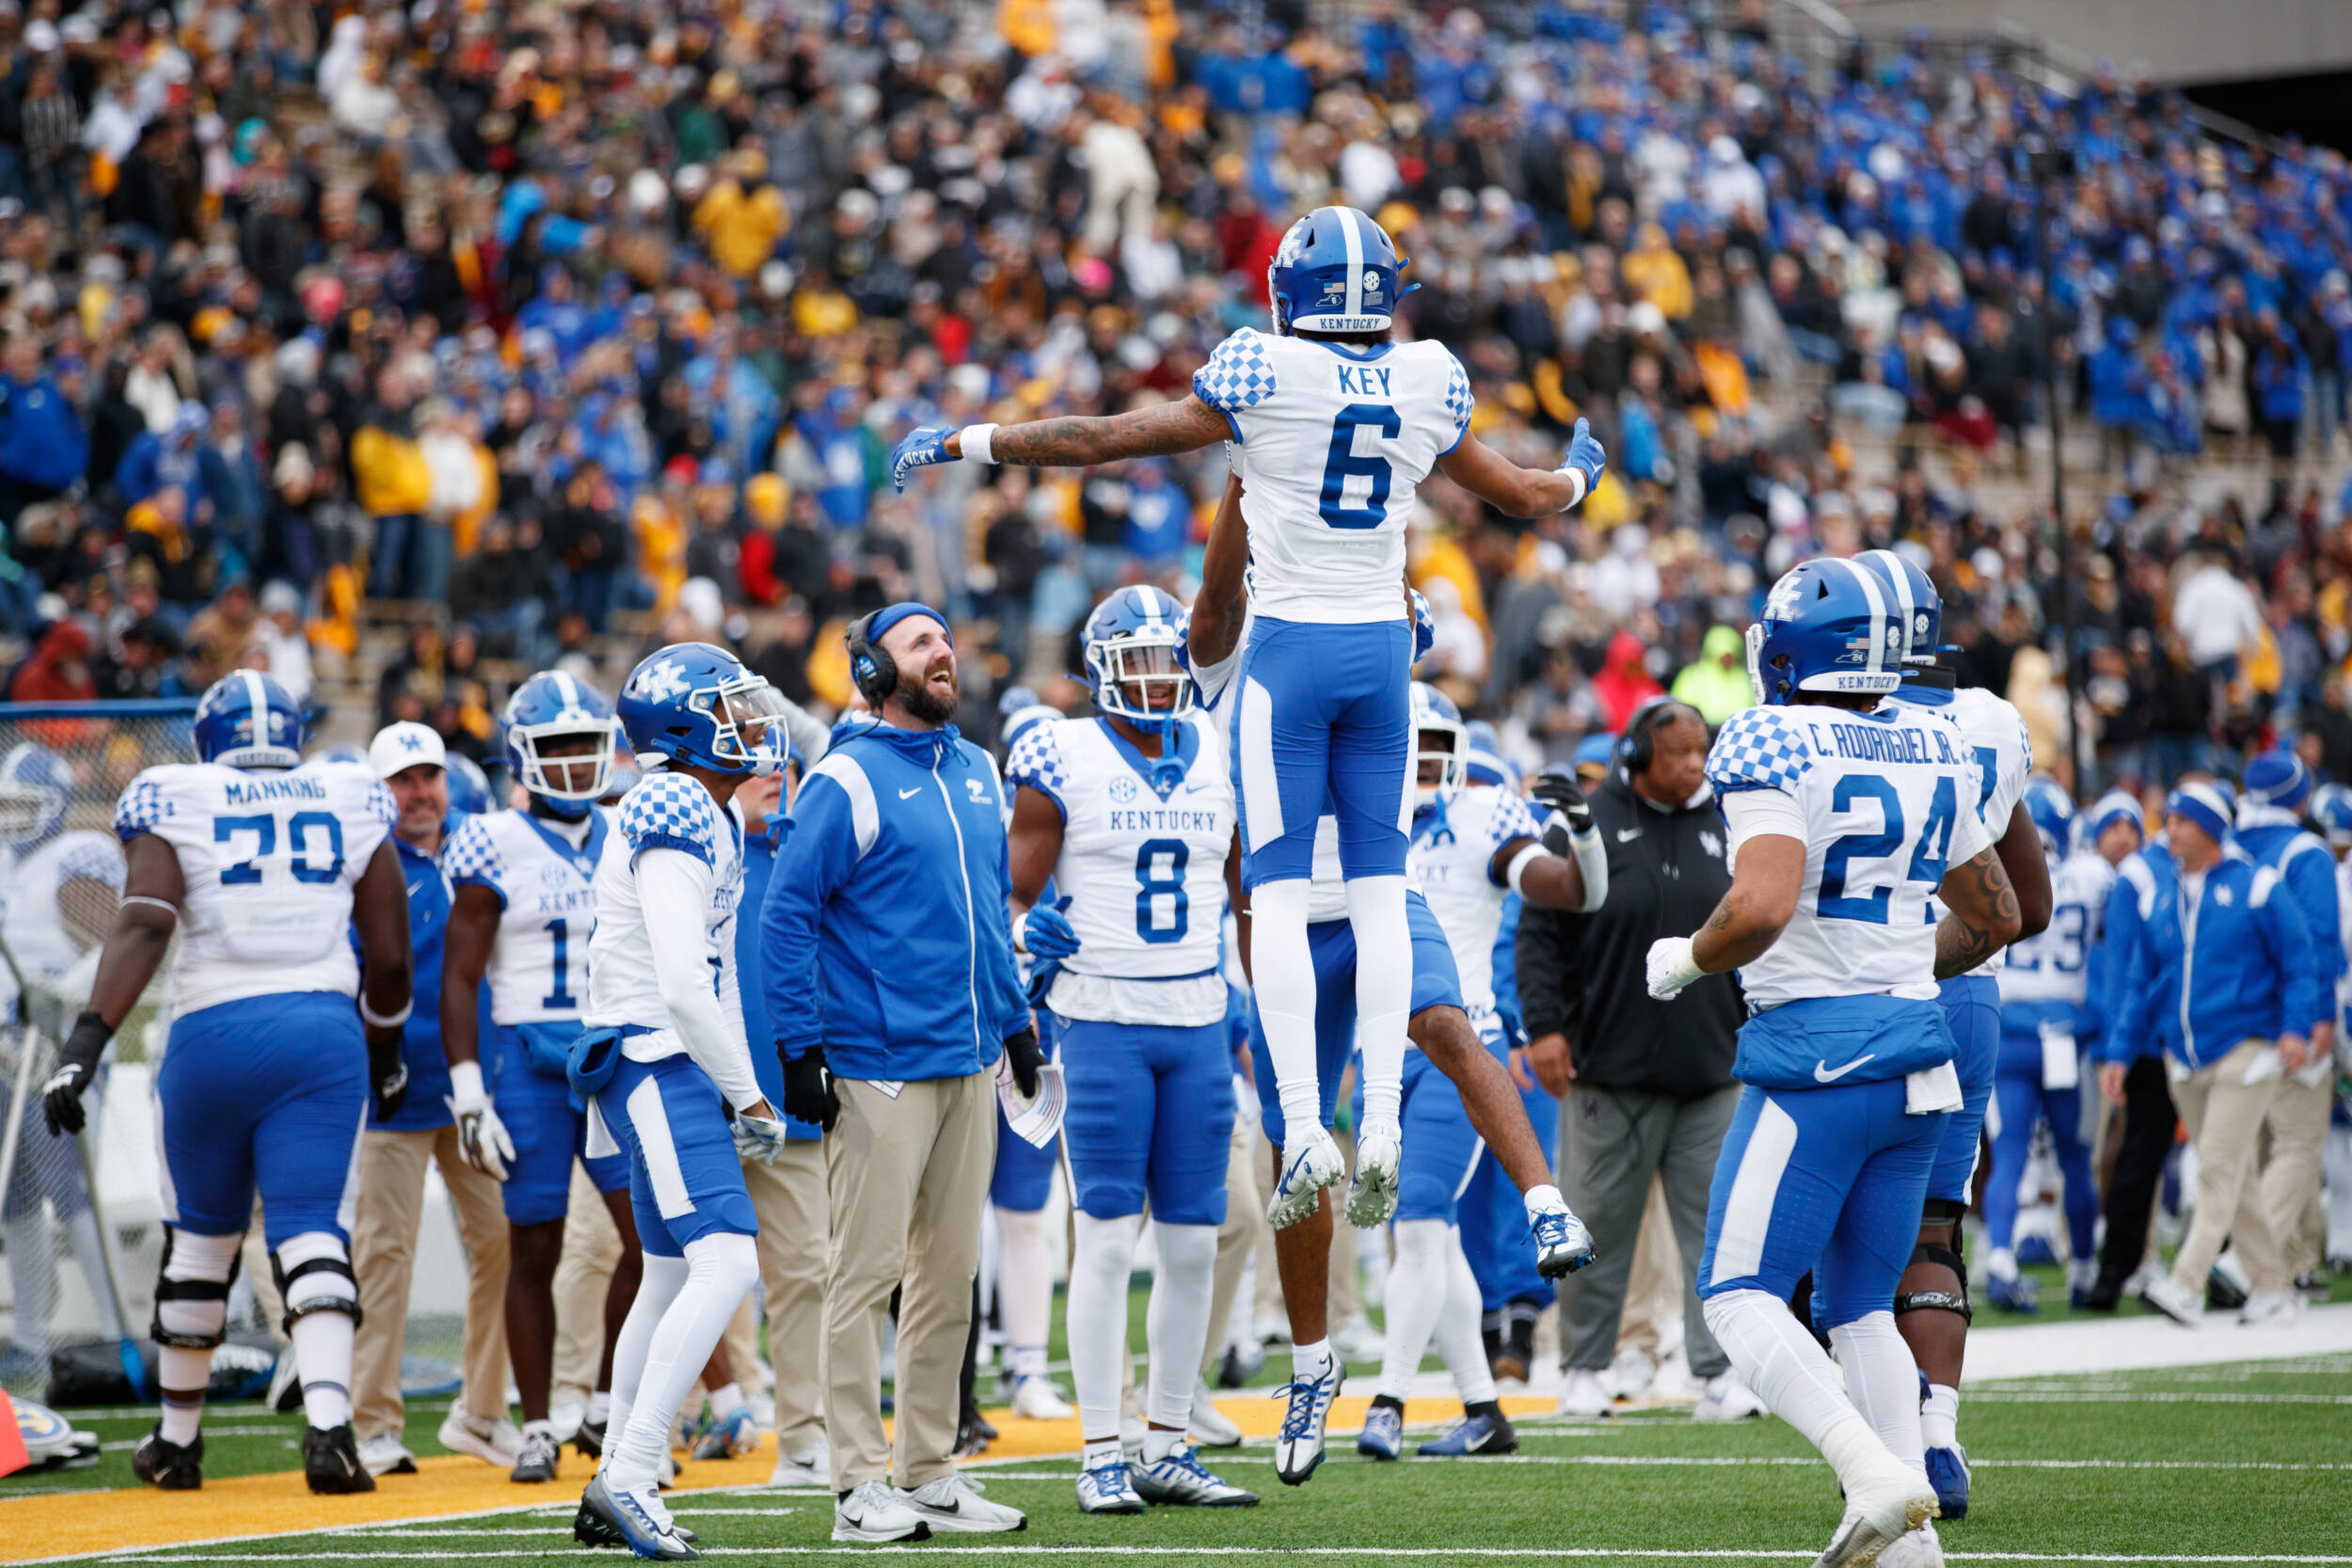 Game Day Central: Kentucky at Missouri